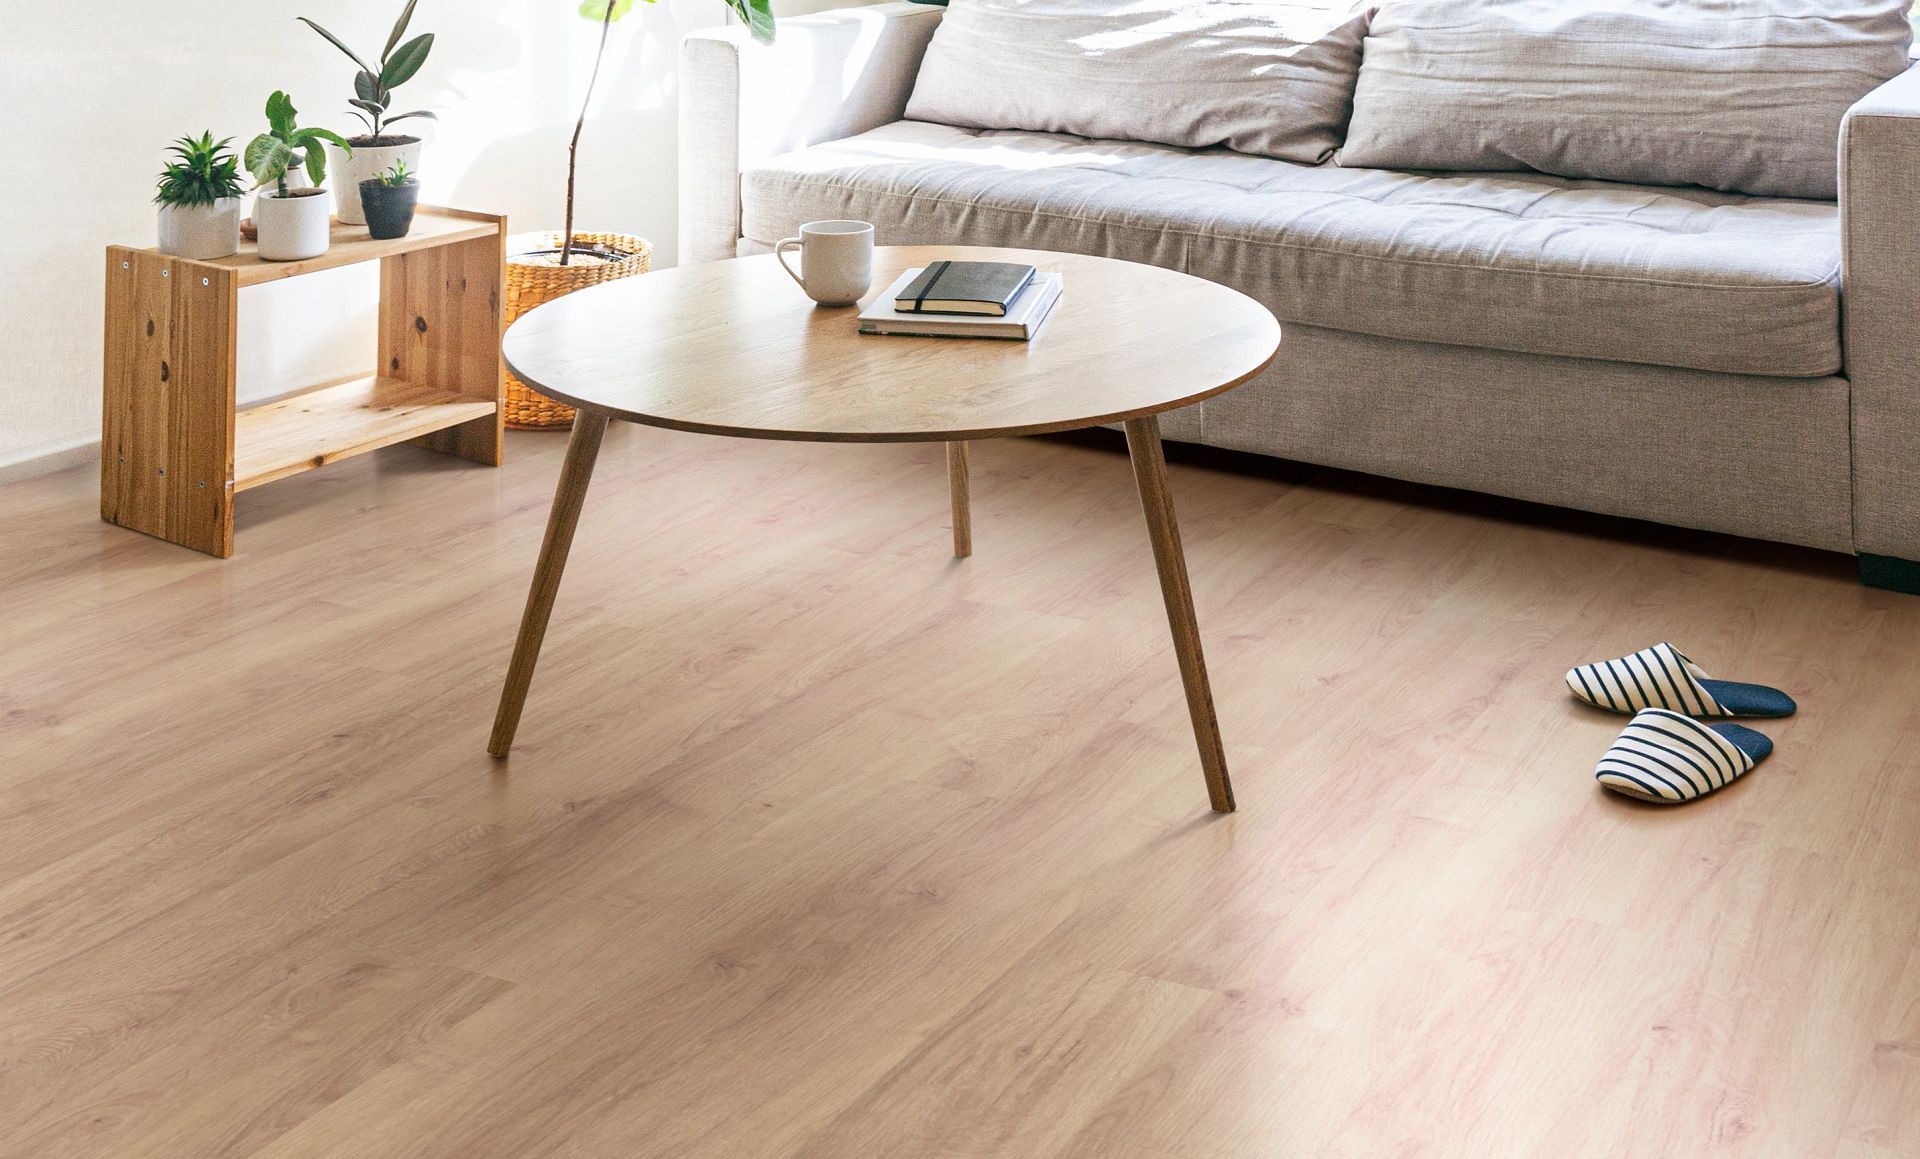 How To Install Laminate Flooring In Living Room